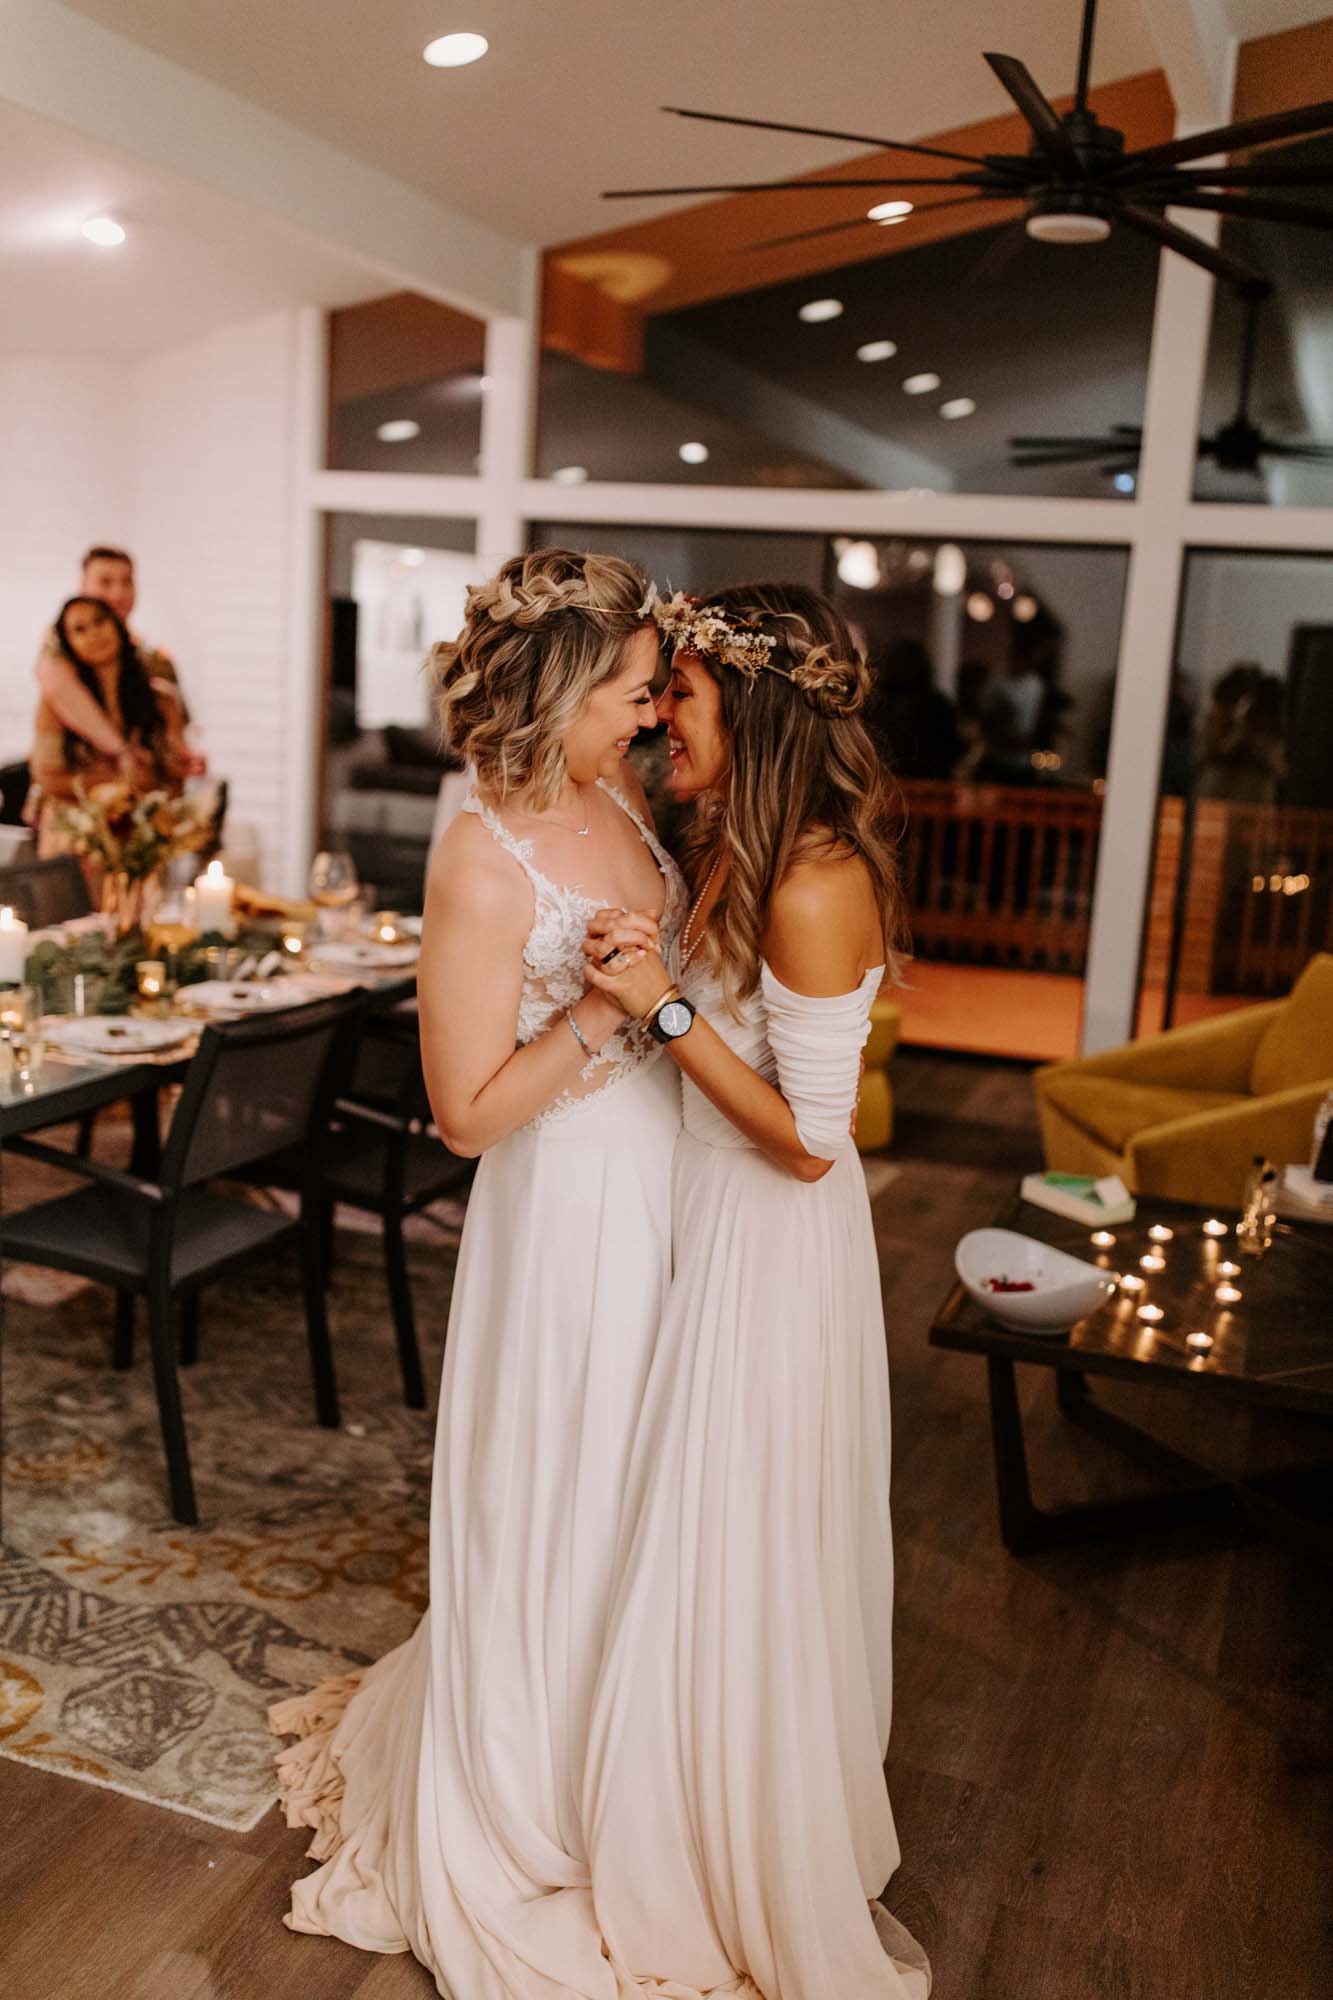 Breathtaking Sedona elopement surrounded by close family and friends | Jessica and Nick Photo + Film | Featured on Equally Wed, the leading LGBTQ+ wedding magazine